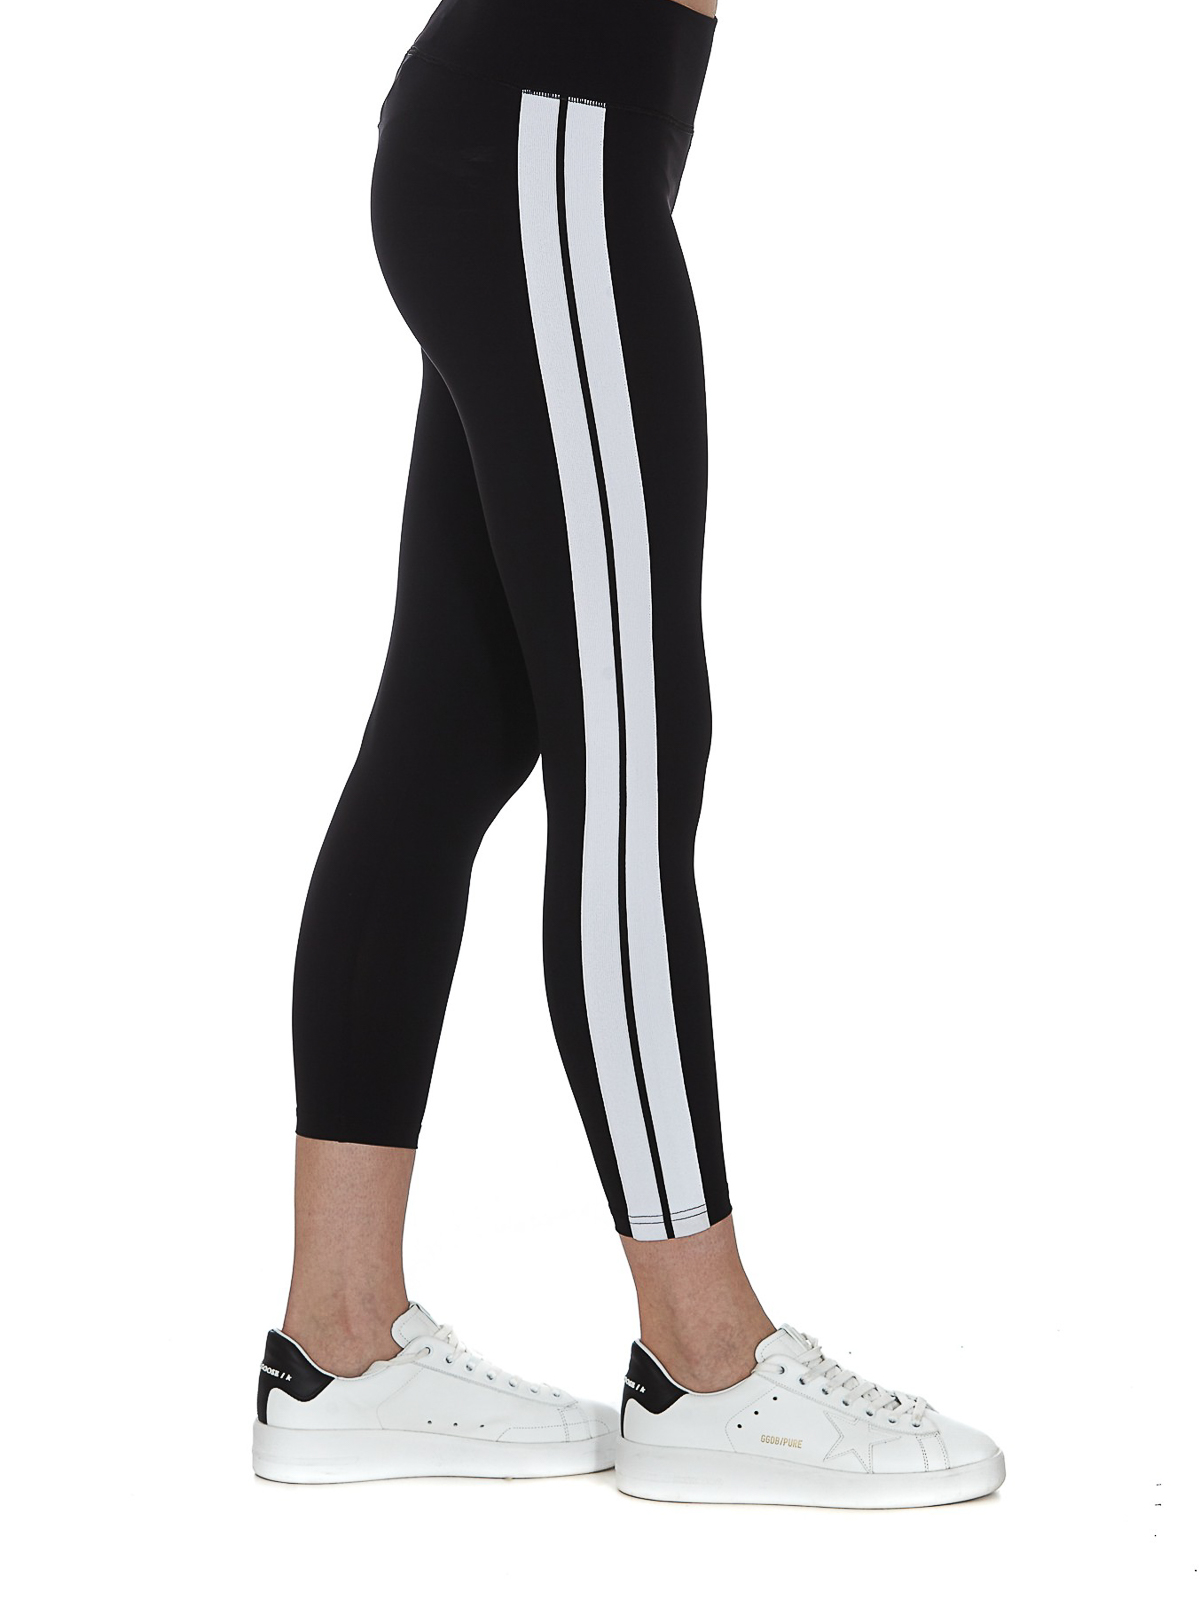 Women's Leggings With Contrasting Side Bands by Palm Angels